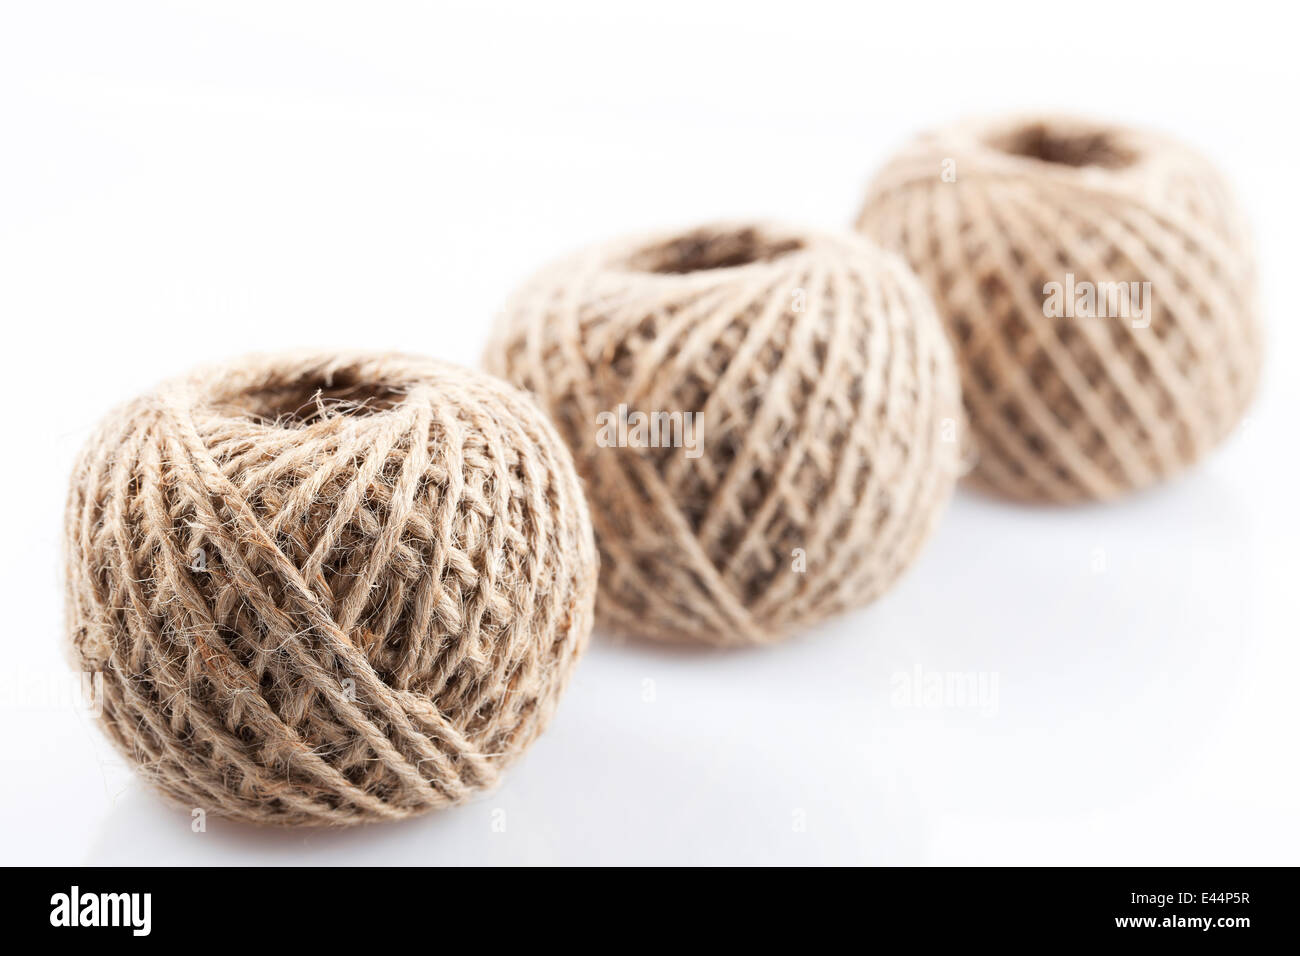 Three balls of twine with focus on front twine ball. Stock Photo